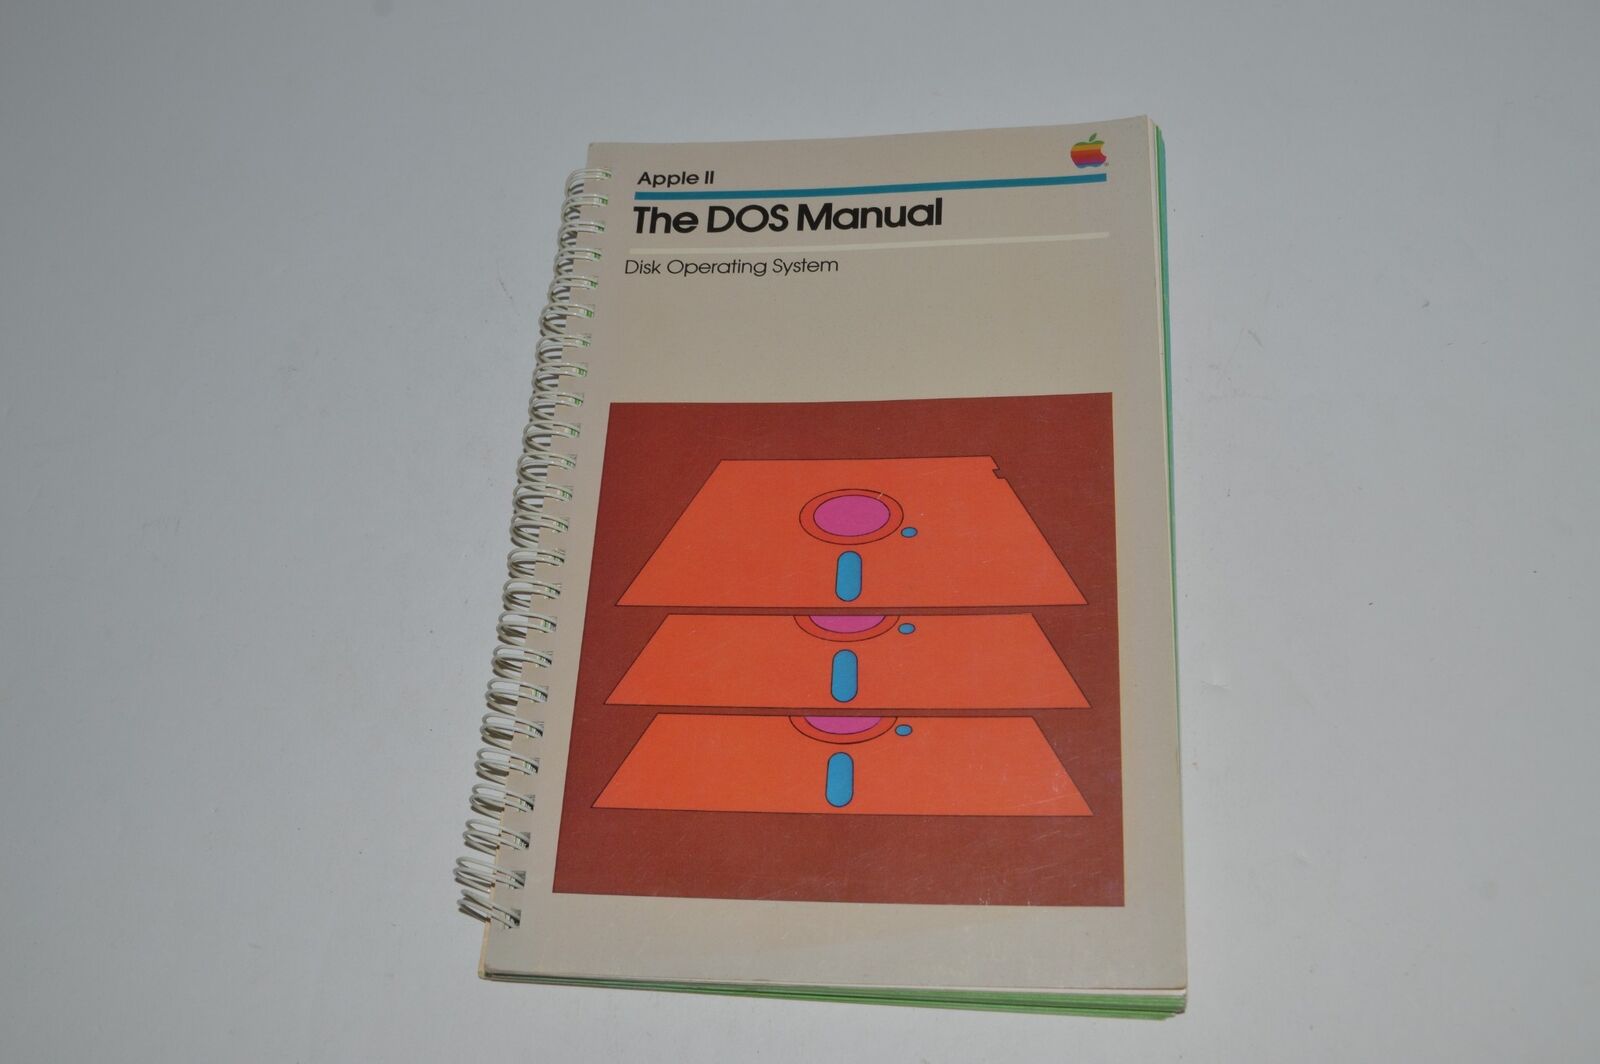 *TC* APPLE II THE DOS MANUAL DISK OPERATING SYSTEM  030-0115-8 (BOOK947)